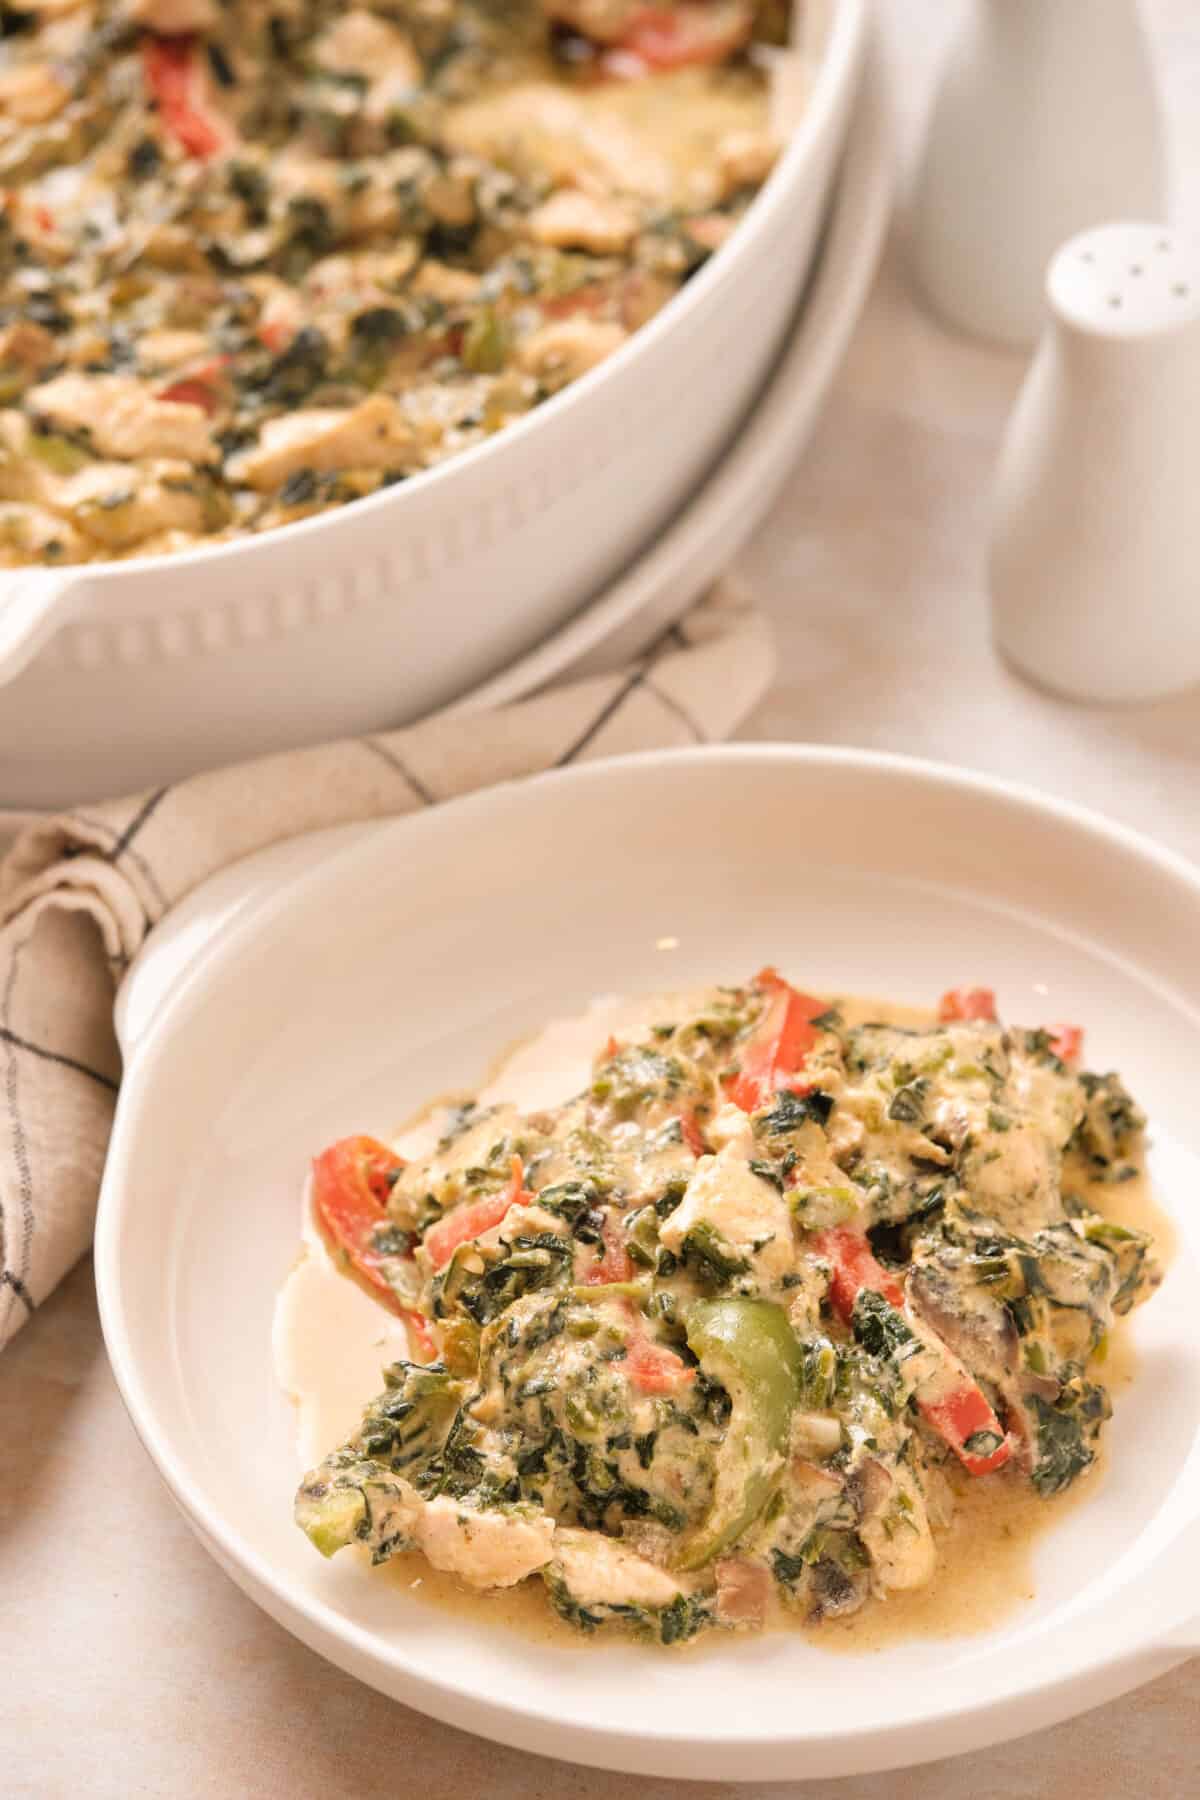 Chicken and veggie casserole on a plate.